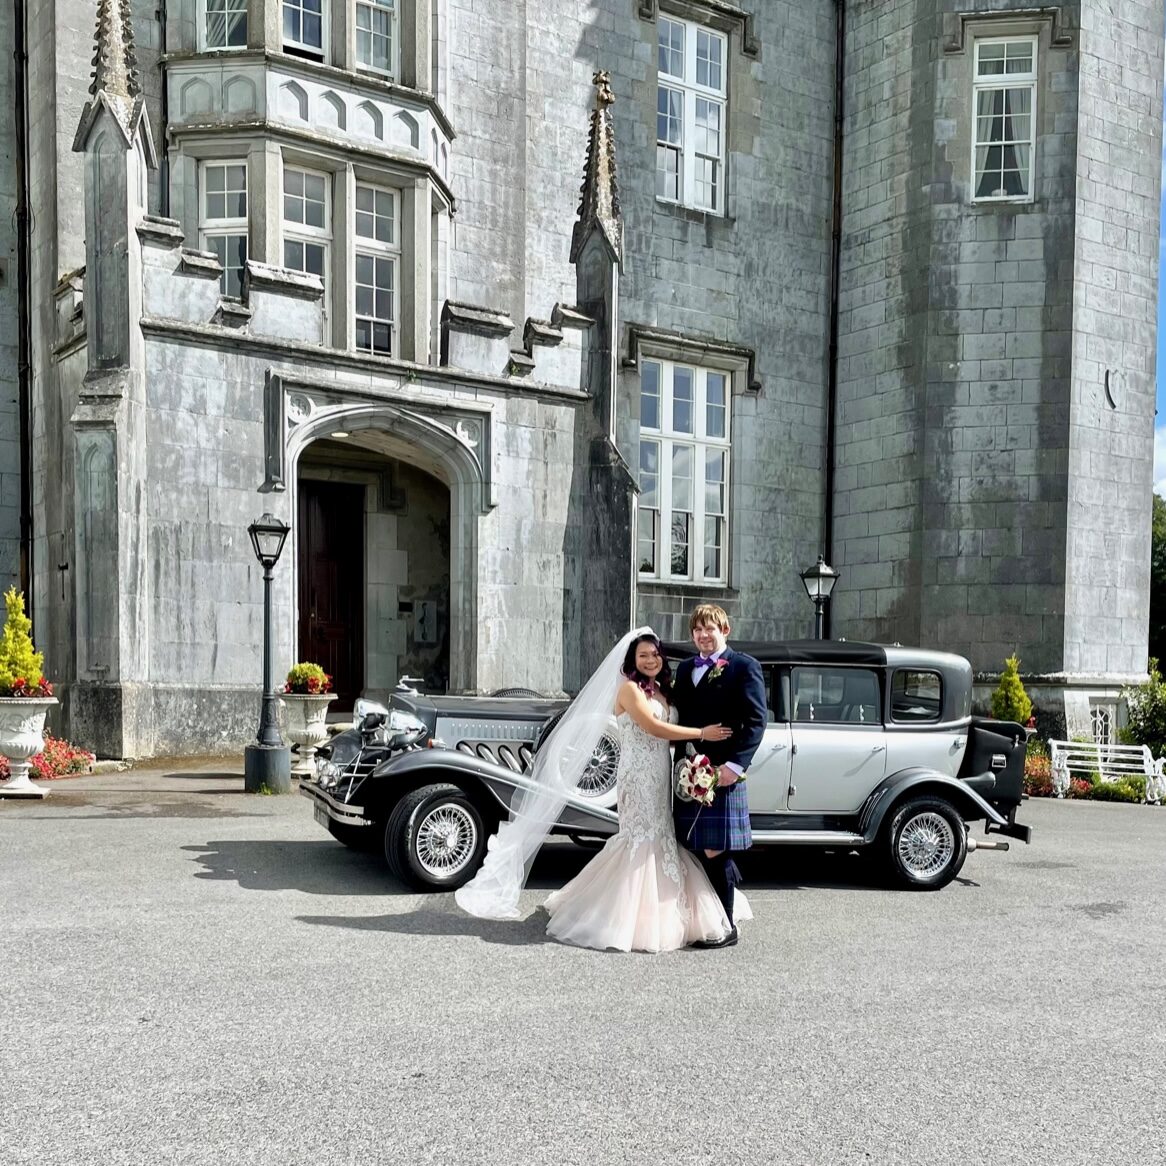 Caroline McCarthy Celebrant & Registered Celebrant Ireland - Cork Kerry Tipperary Limerick Kildare and more - Kinnity Castle, Co Offaly